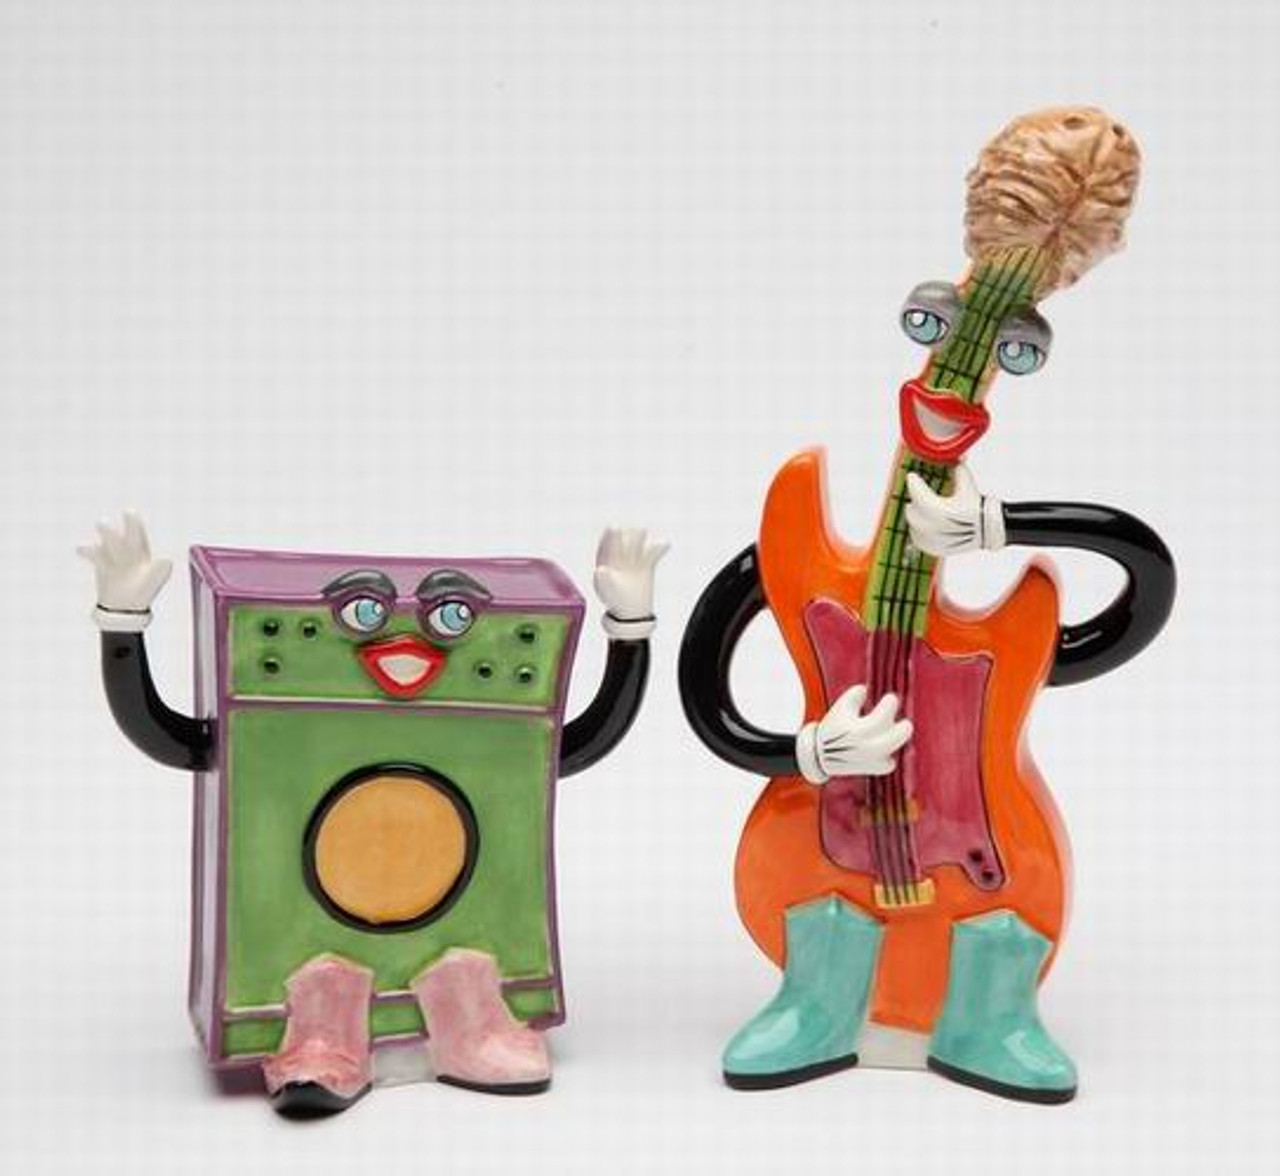 https://cdn11.bigcommerce.com/s-oo0gdojvjo/images/stencil/1280x1280/products/4096/6118/62228-rock-roll-electric-bass-amp-salt-and-pepper-shakers-set-of-4__00793.1536906714.jpg?c=2